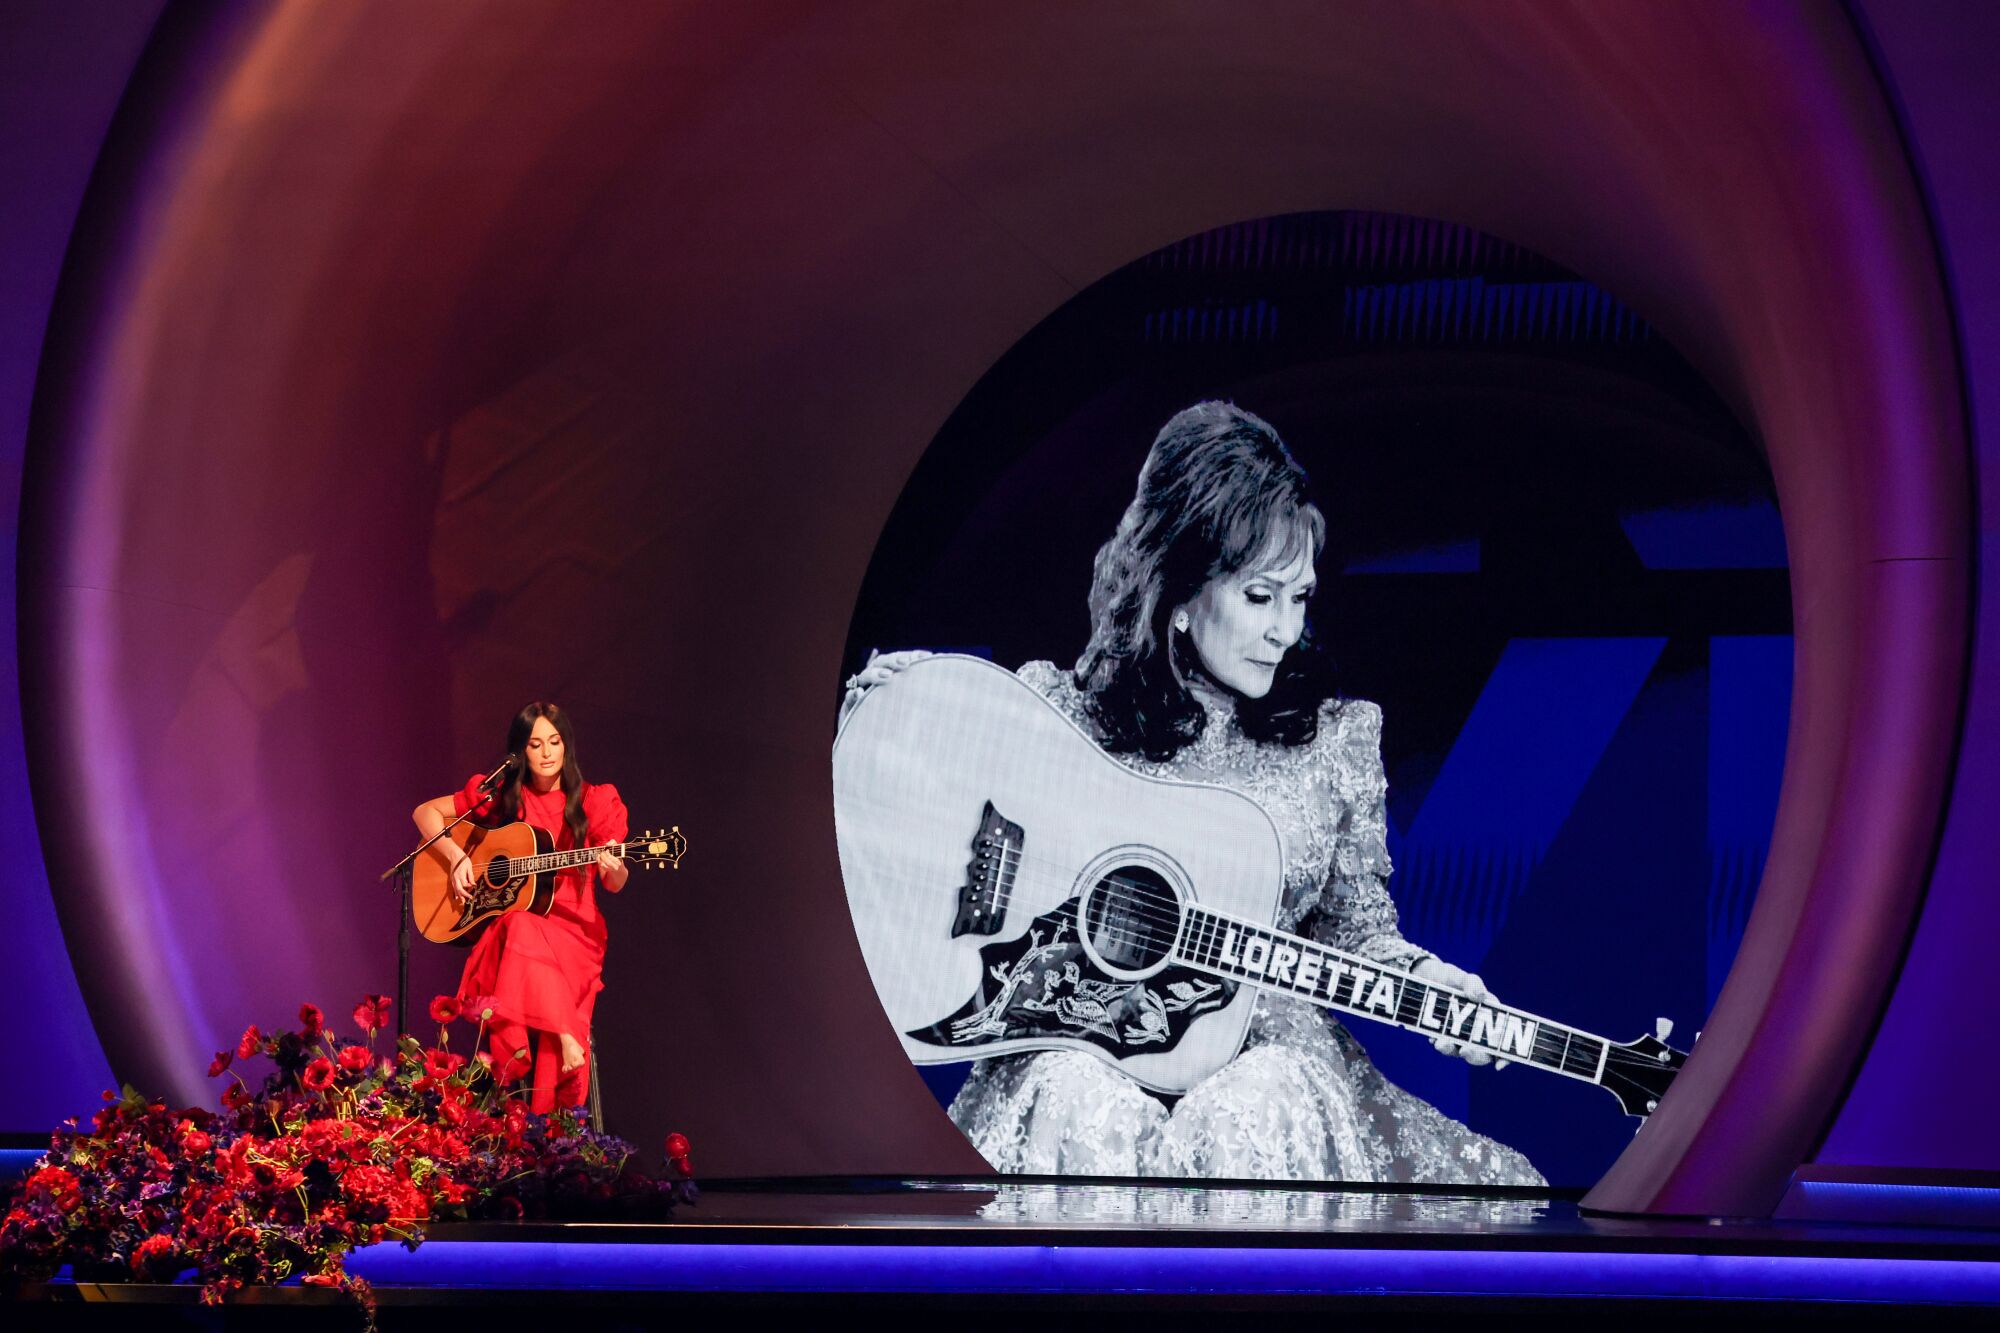 A woman sitting and playing guitar in front of a mic and giant black-and-white image of a woman playing guitar